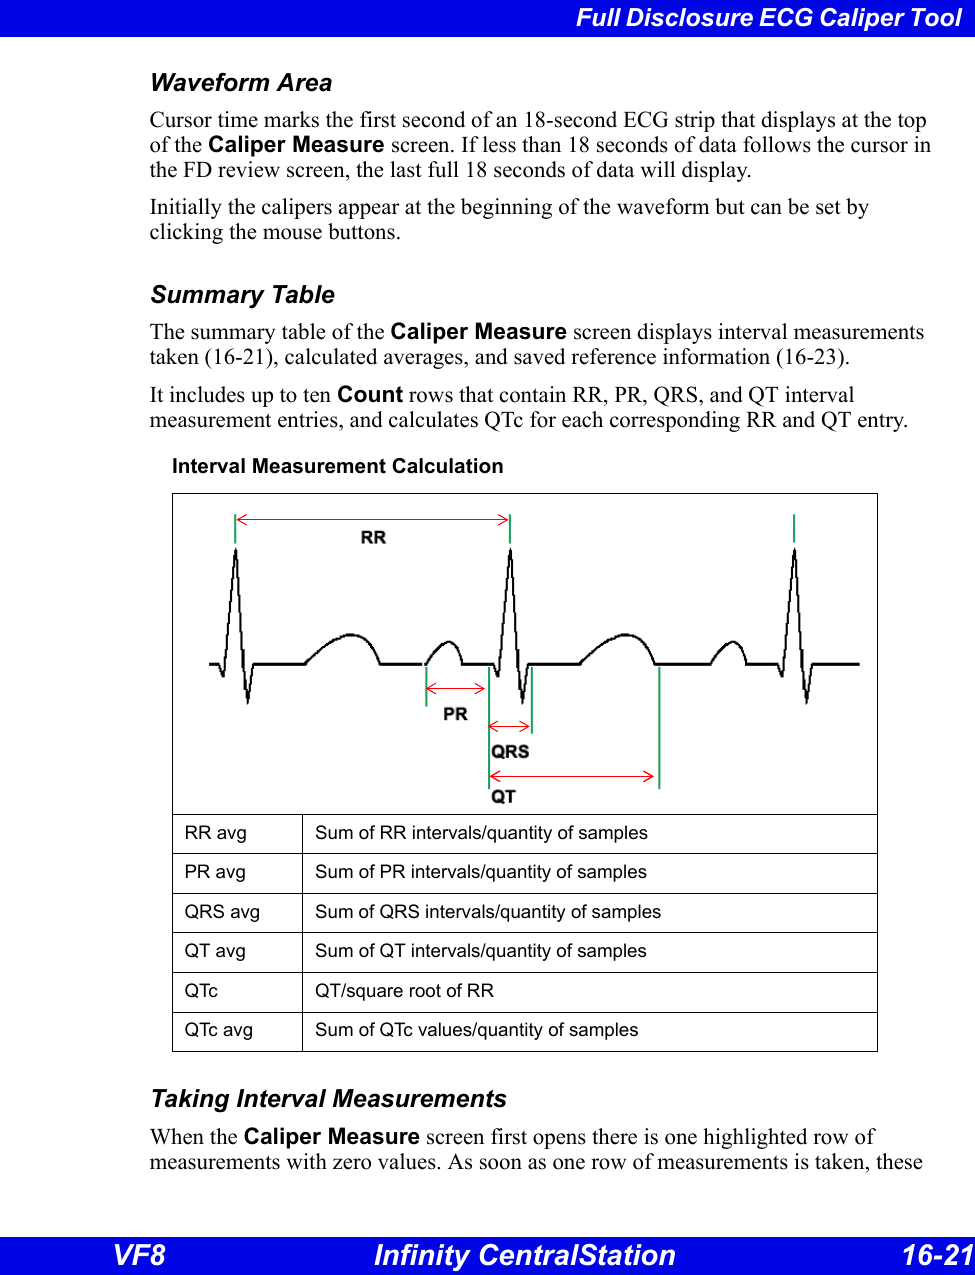 Full Disclosure ECG Caliper Tool VF8 Infinity CentralStation 16-21 Waveform AreaCursor time marks the first second of an 18-second ECG strip that displays at the top of the Caliper Measure screen. If less than 18 seconds of data follows the cursor in the FD review screen, the last full 18 seconds of data will display.Initially the calipers appear at the beginning of the waveform but can be set by clicking the mouse buttons. Summary TableThe summary table of the Caliper Measure screen displays interval measurements taken (16-21), calculated averages, and saved reference information (16-23). It includes up to ten Count rows that contain RR, PR, QRS, and QT interval measurement entries, and calculates QTc for each corresponding RR and QT entry. Taking Interval MeasurementsWhen the Caliper Measure screen first opens there is one highlighted row of measurements with zero values. As soon as one row of measurements is taken, these Interval Measurement CalculationRR avg Sum of RR intervals/quantity of samplesPR avg Sum of PR intervals/quantity of samplesQRS avg Sum of QRS intervals/quantity of samplesQT avg Sum of QT intervals/quantity of samplesQTc  QT/square root of RRQTc avg Sum of QTc values/quantity of samples